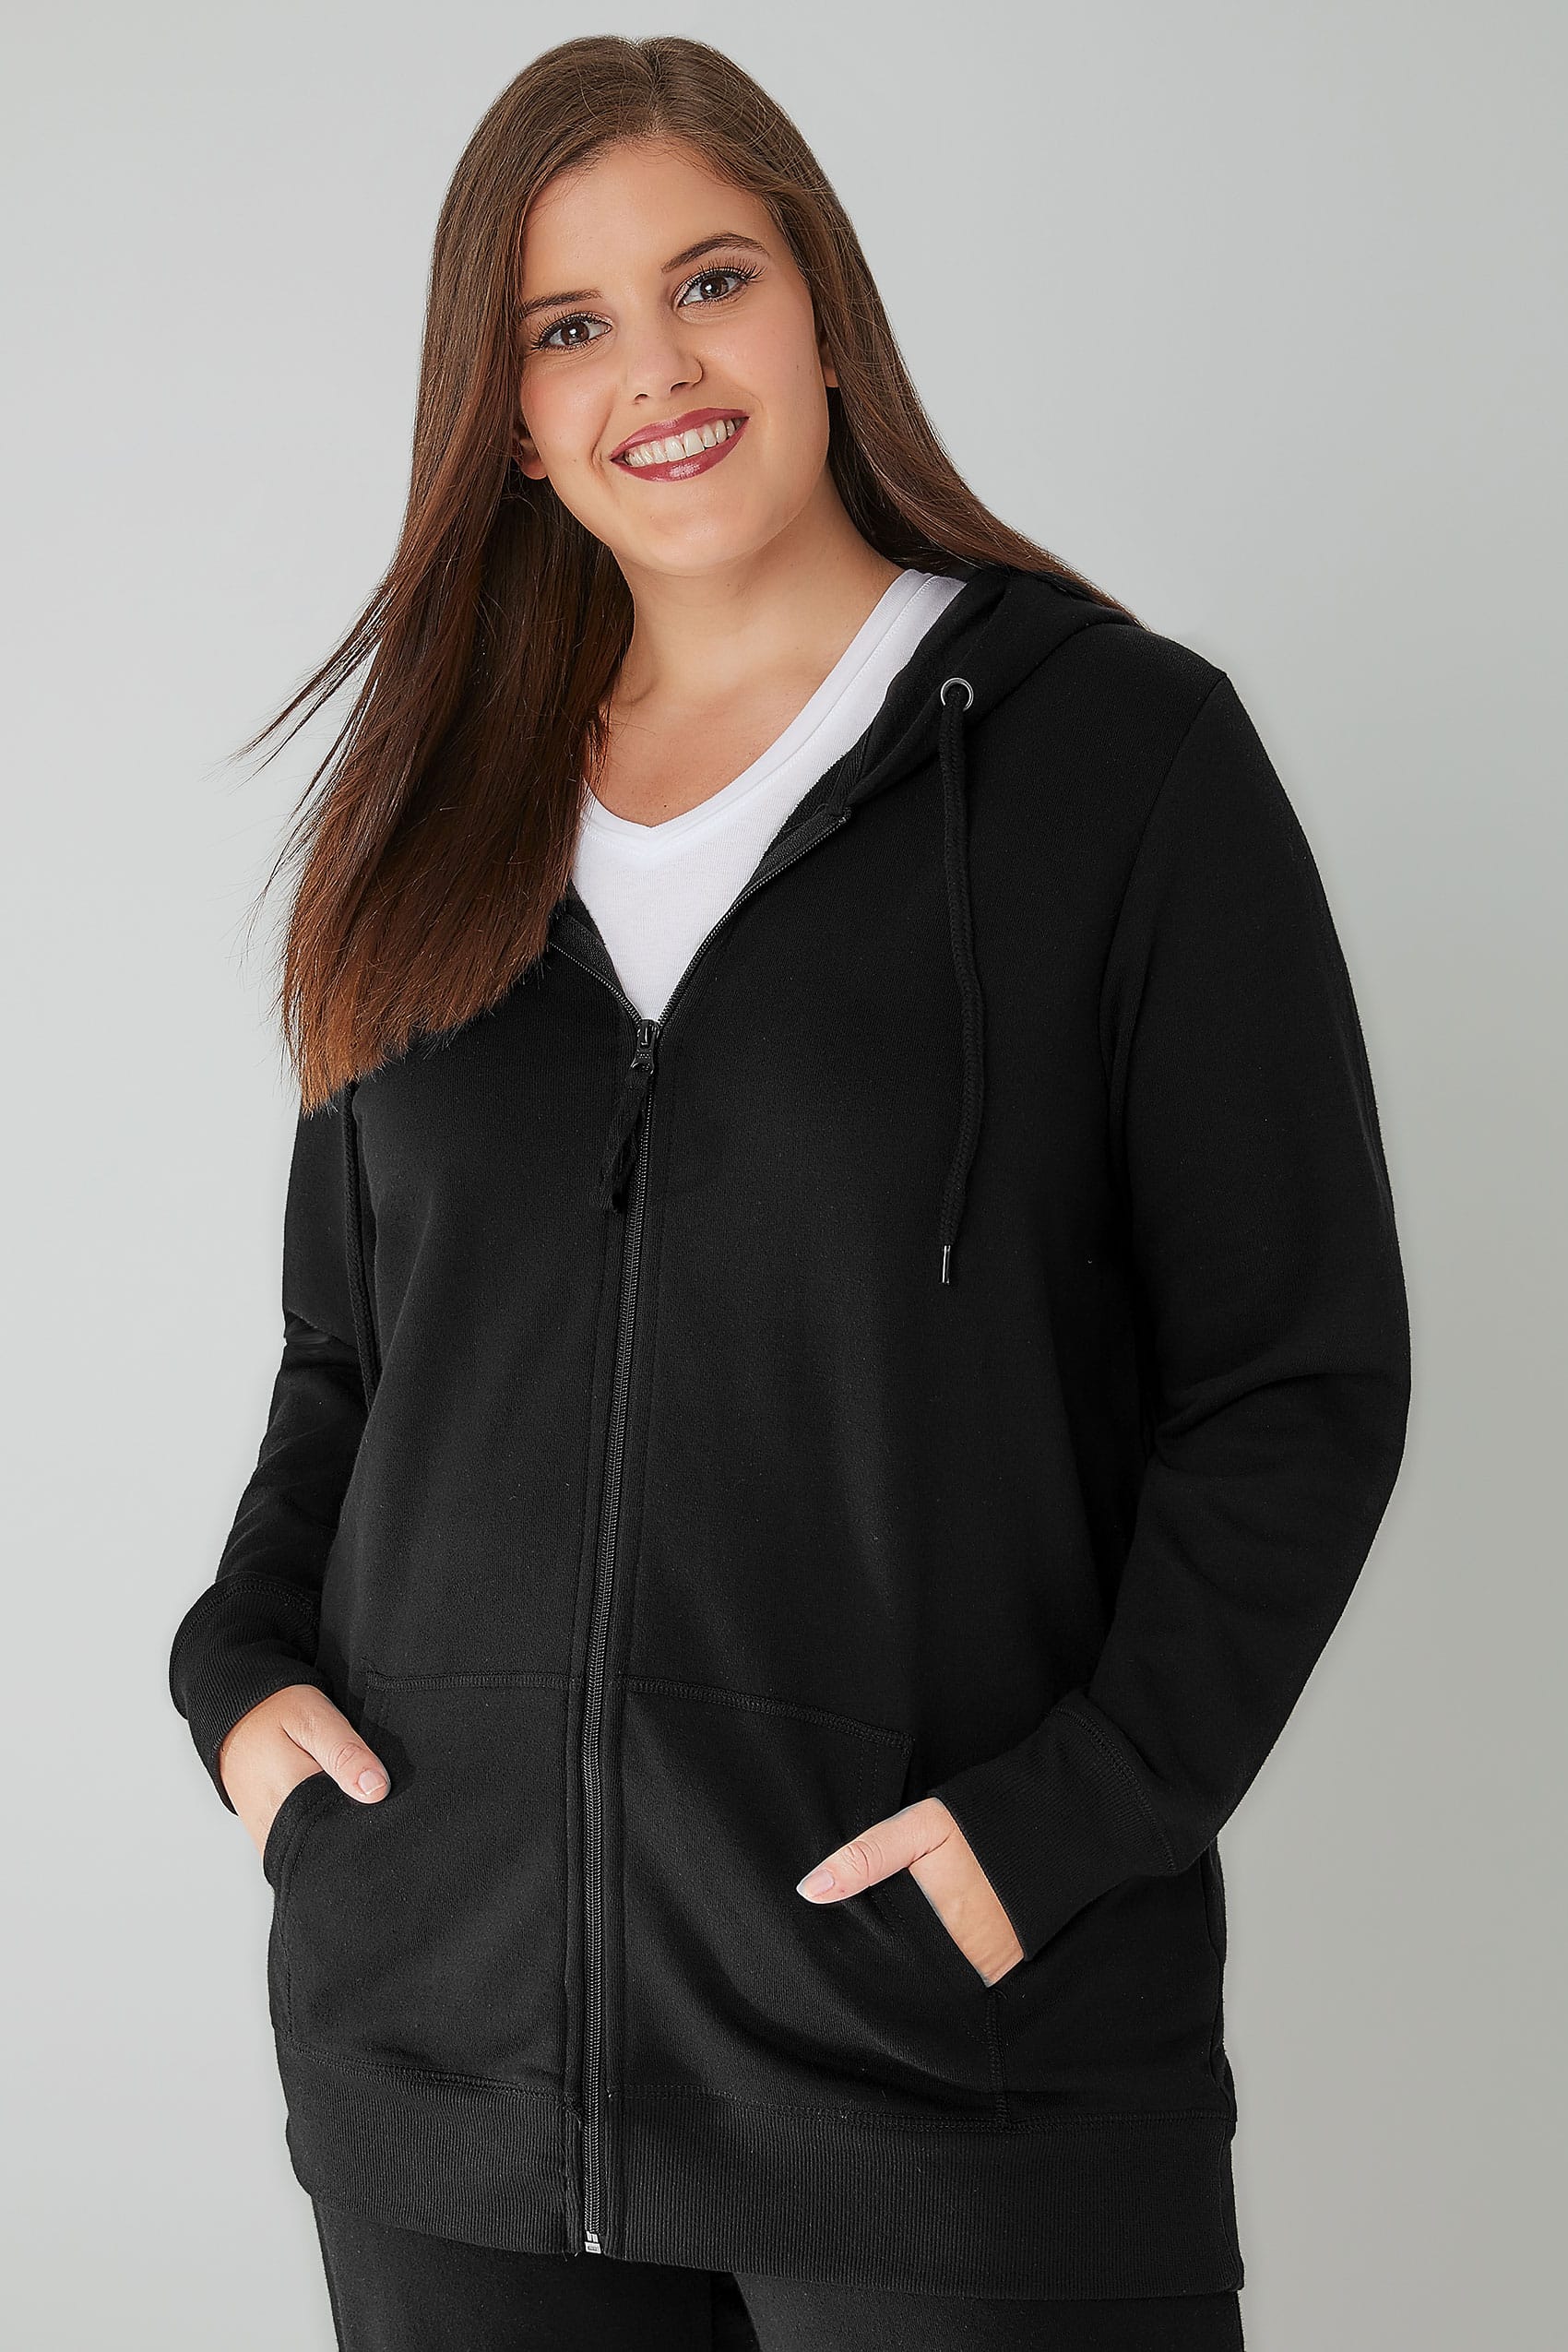 Black Zip Through Hoodie With Pockets, Plus size 16 to 36